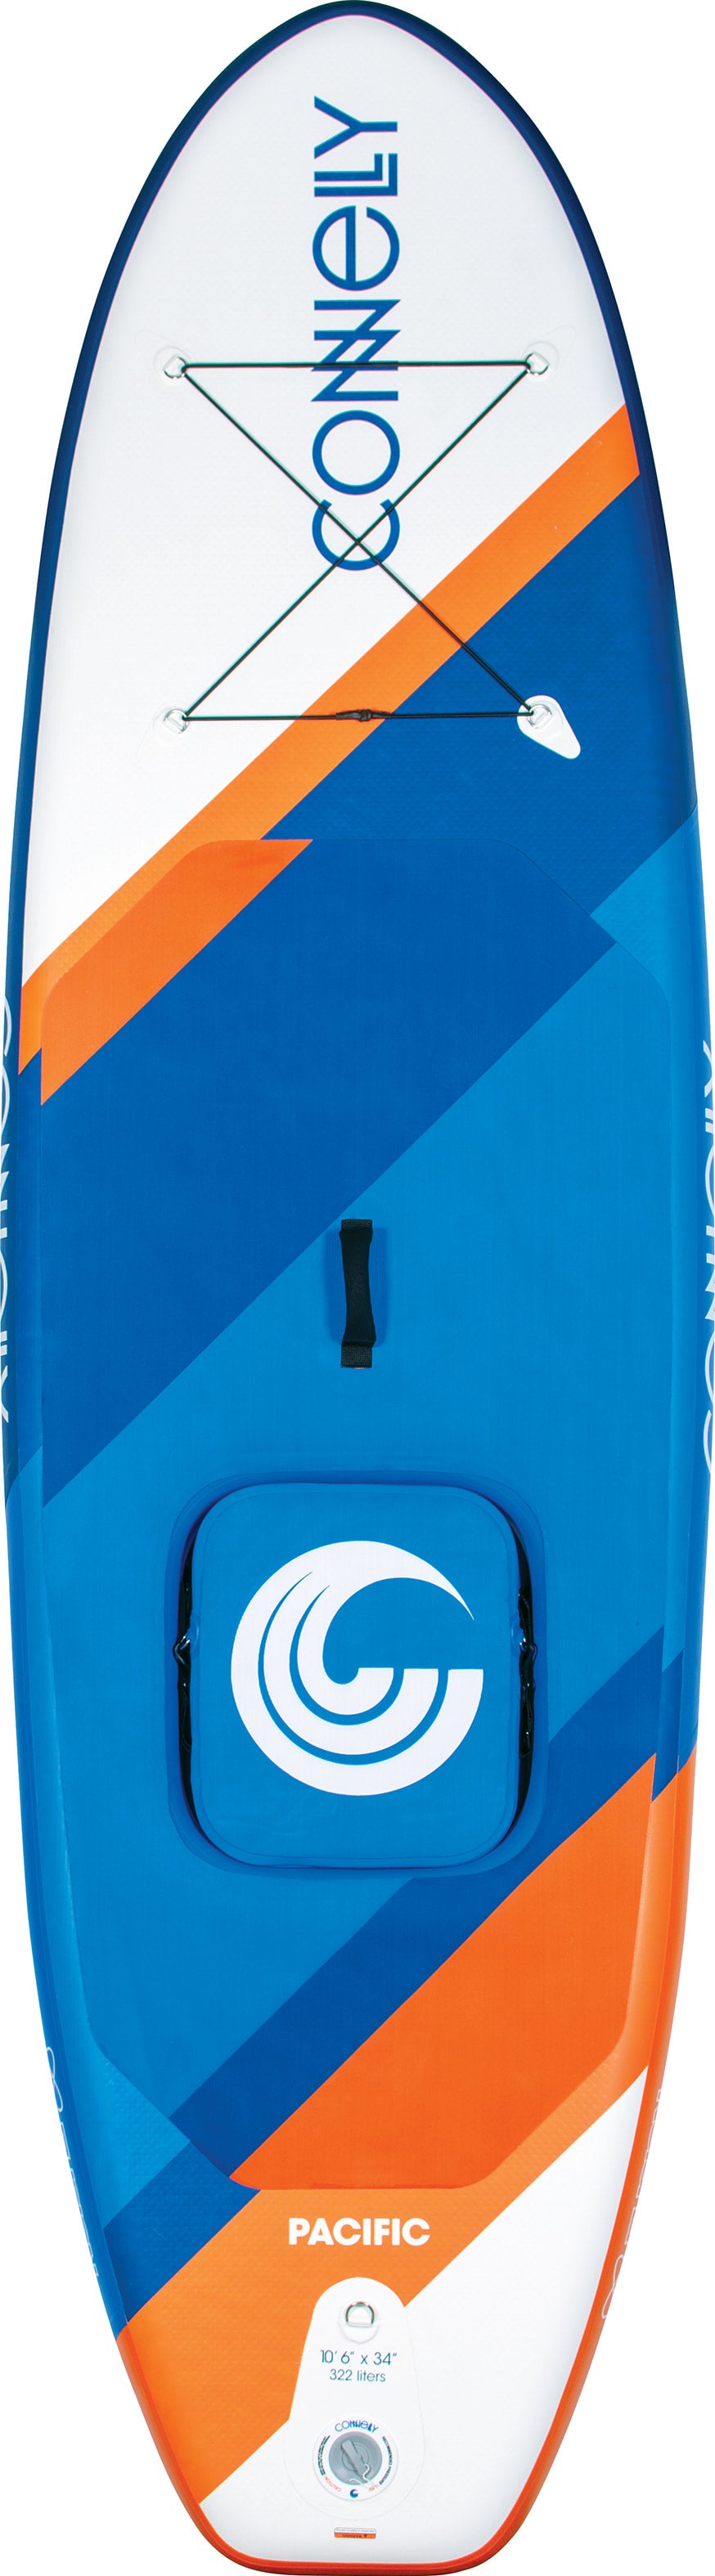 Connelly Pacific Inflatable Standup Paddle Board